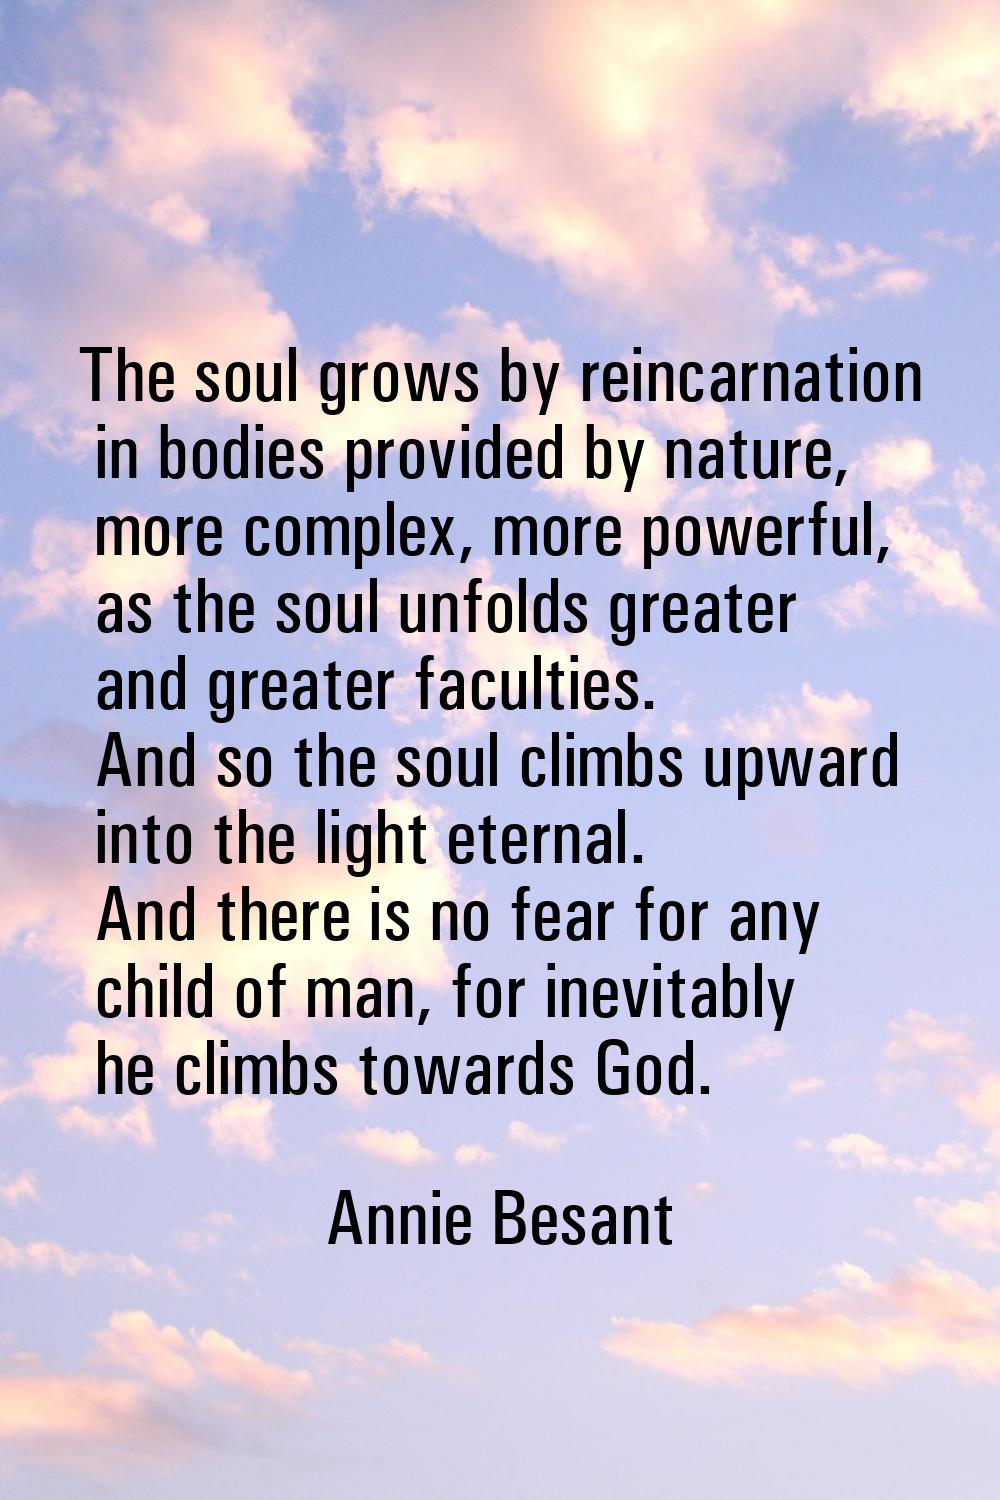 The soul grows by reincarnation in bodies provided by nature, more complex, more powerful, as the s